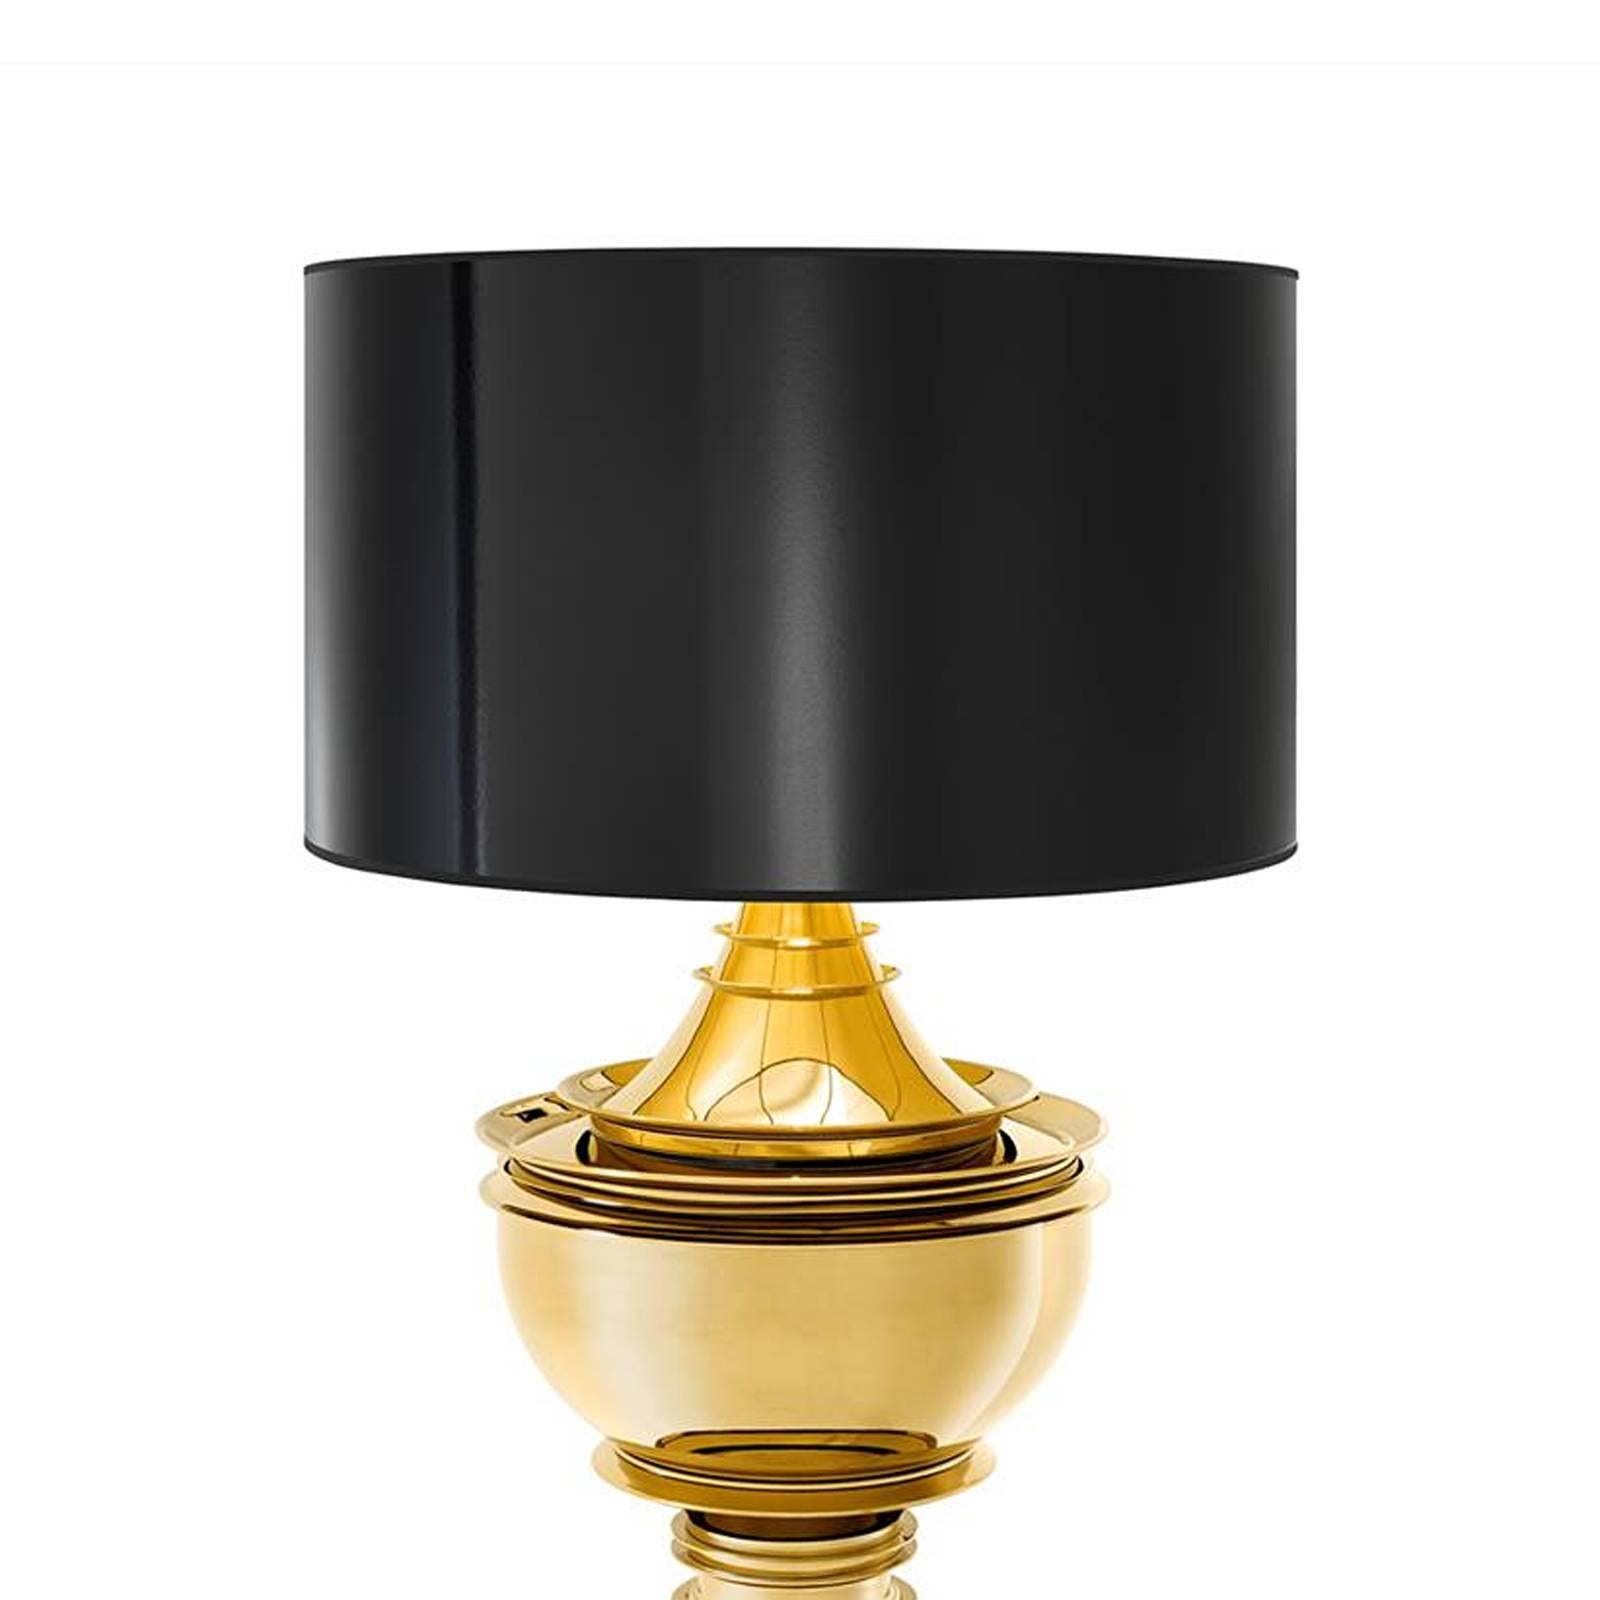 Dutch Royal Gold Table Lamp in Gold Finish